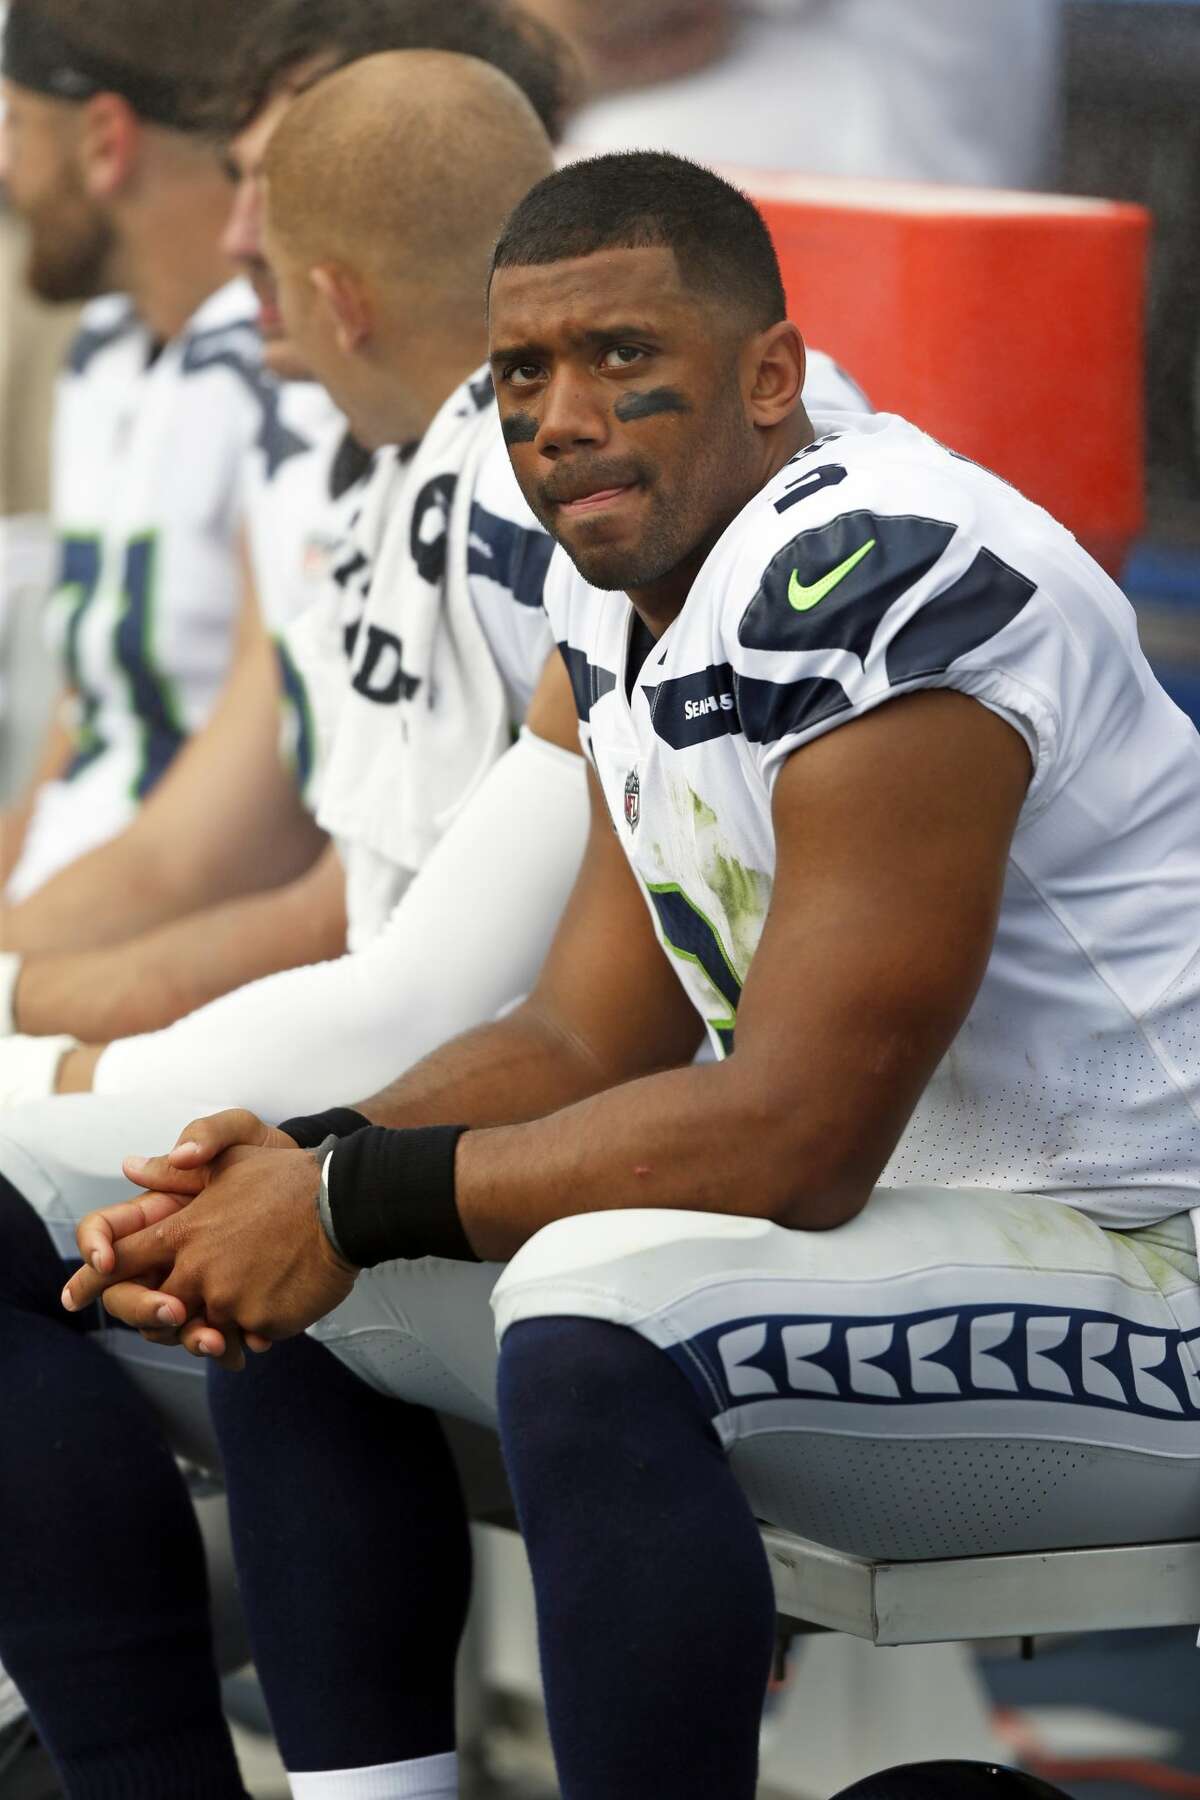 Seattle quarterback Russell Wilson (3) is seen on the sideline during an NFL football game against Tennessee on Sunday, Sept. 24, 2017, in Nashville, Tenn. (AP Photo/Wade Payne)